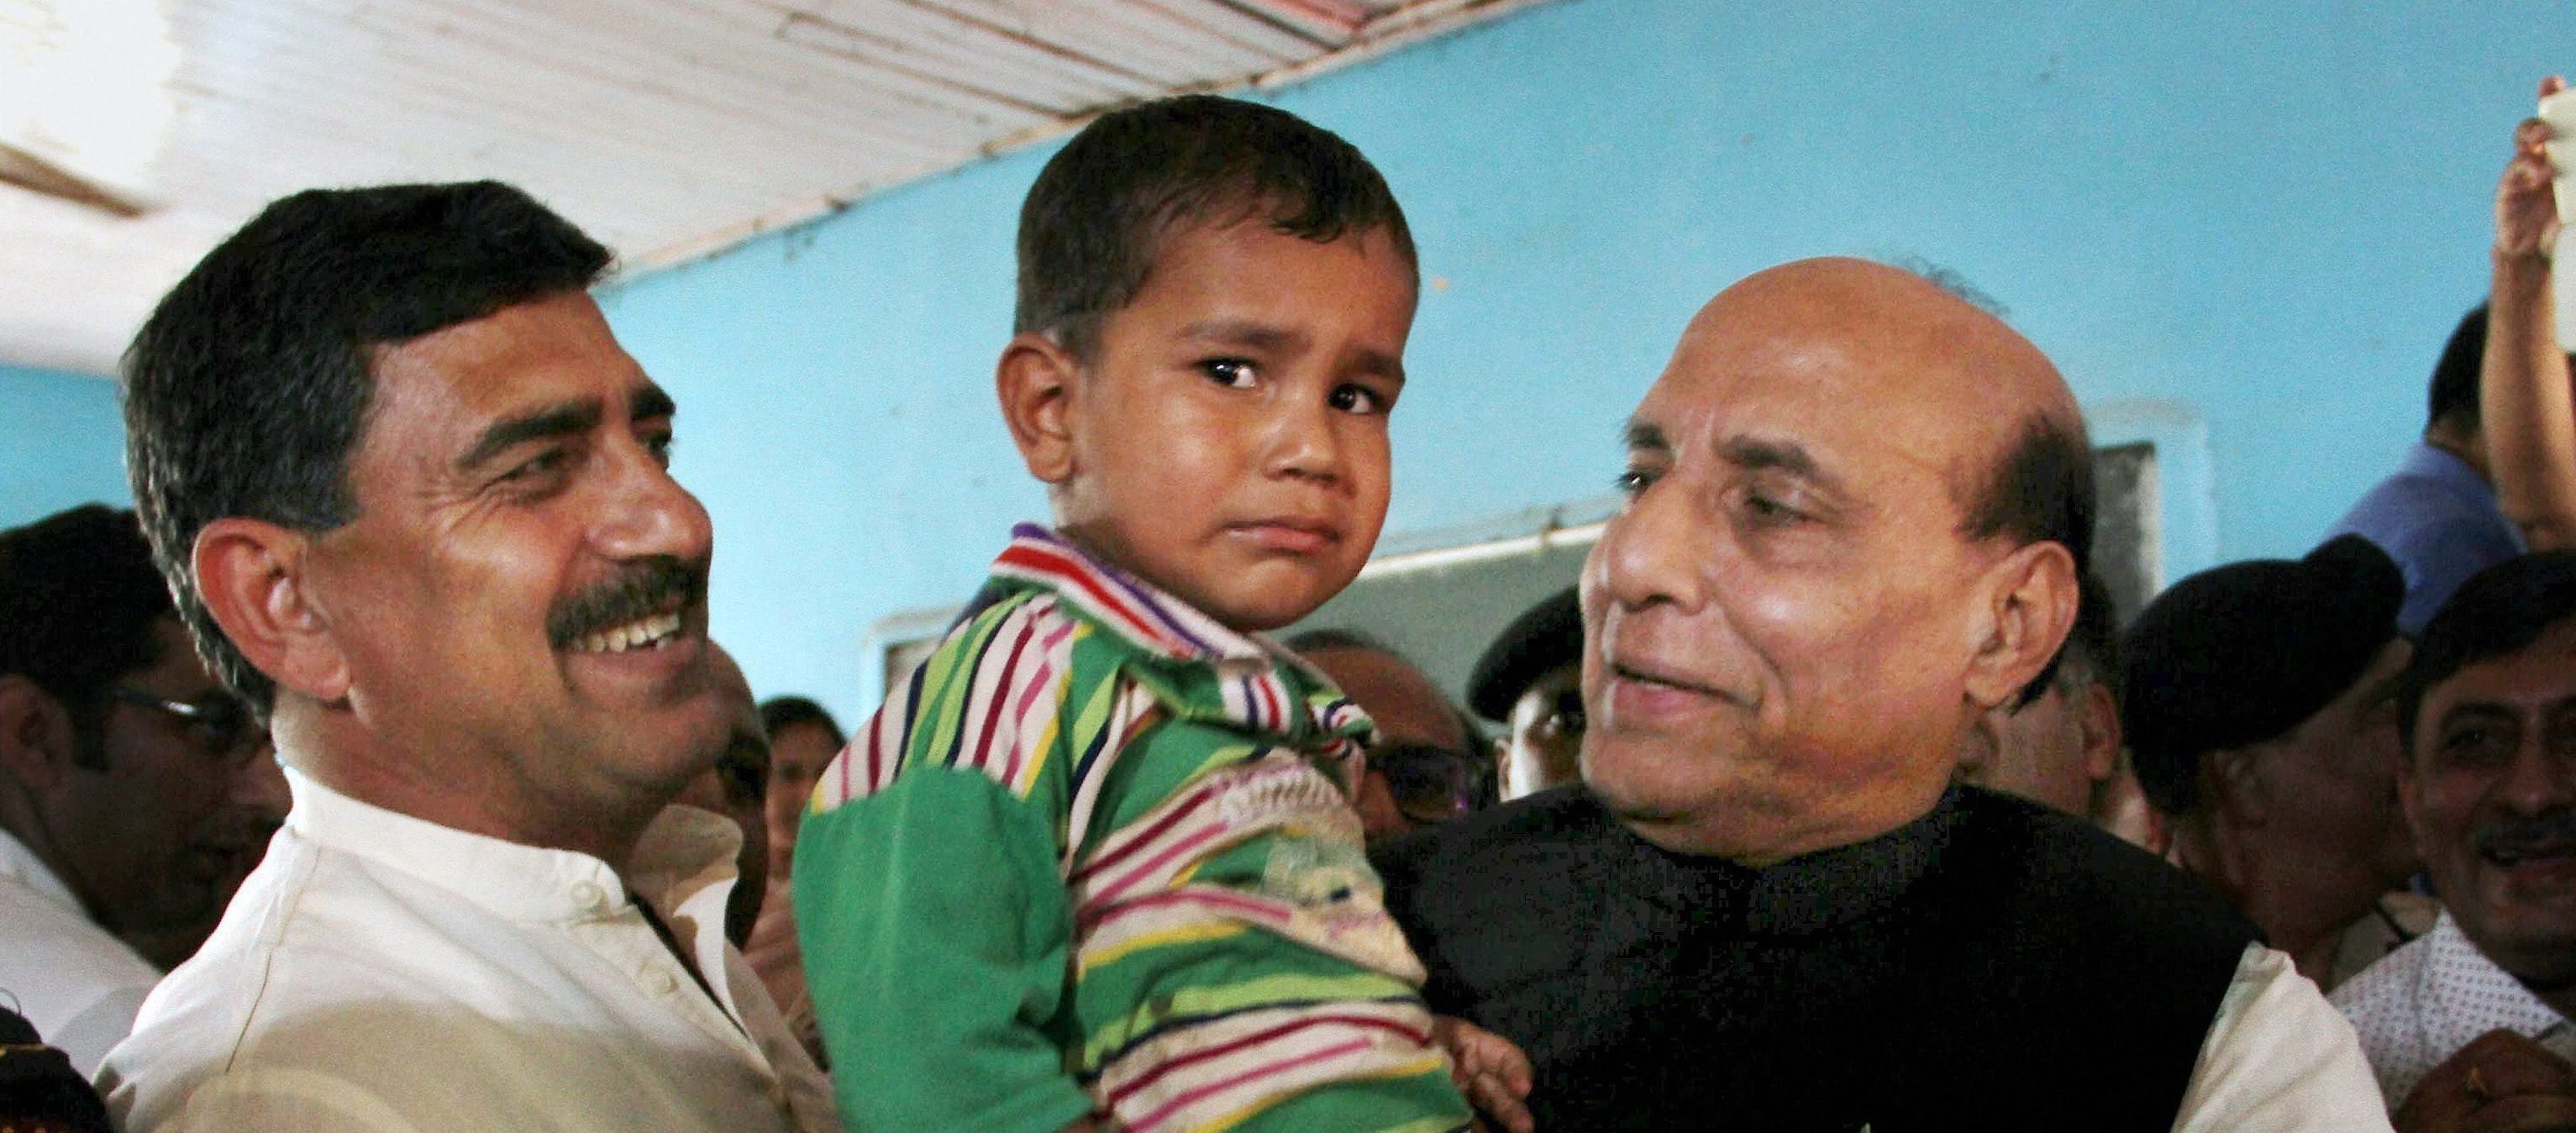 Rajouri: Union Home Minister Rajnath Singh interacts with a child during his visit to a border migrants camp in Nowshera sector of Rajouri district on Monday. PTI Photo (PTI9_11_2017_000119B)